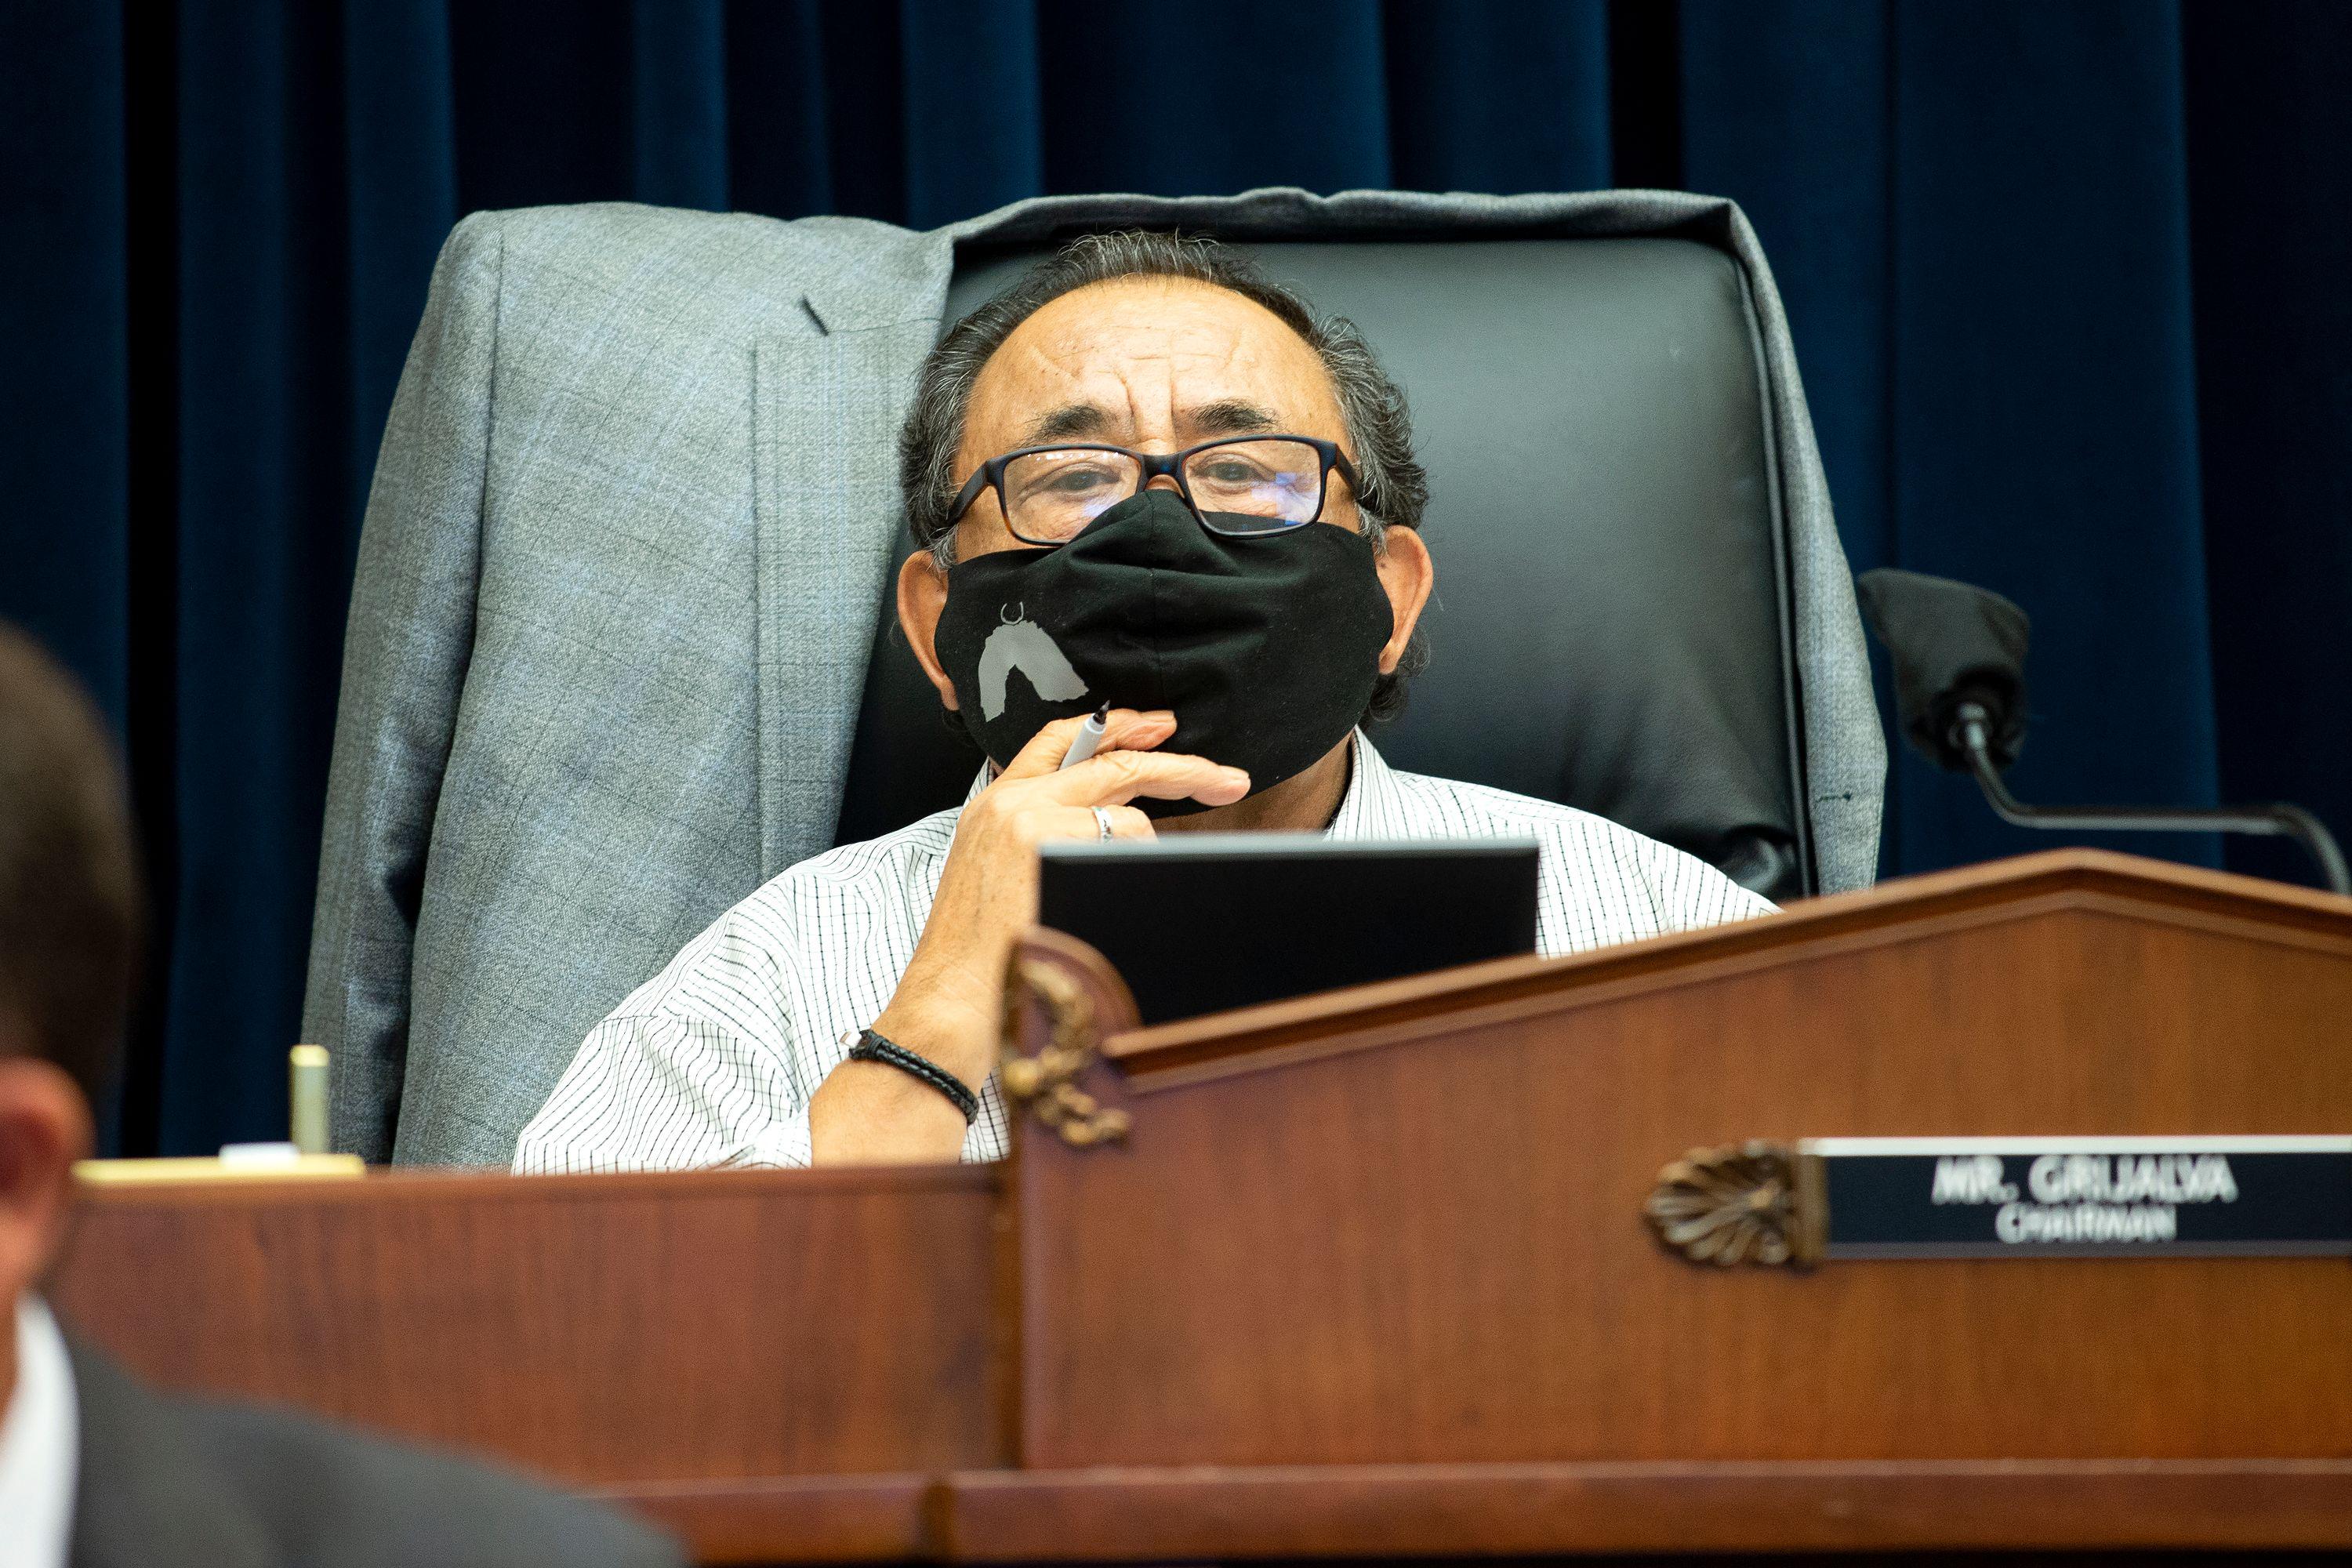 House Natural Resources Committee Chairman Raul Grijalva (D-Ariz.) is seen during a hearing on June 29, 2020 in Washington, D.C.